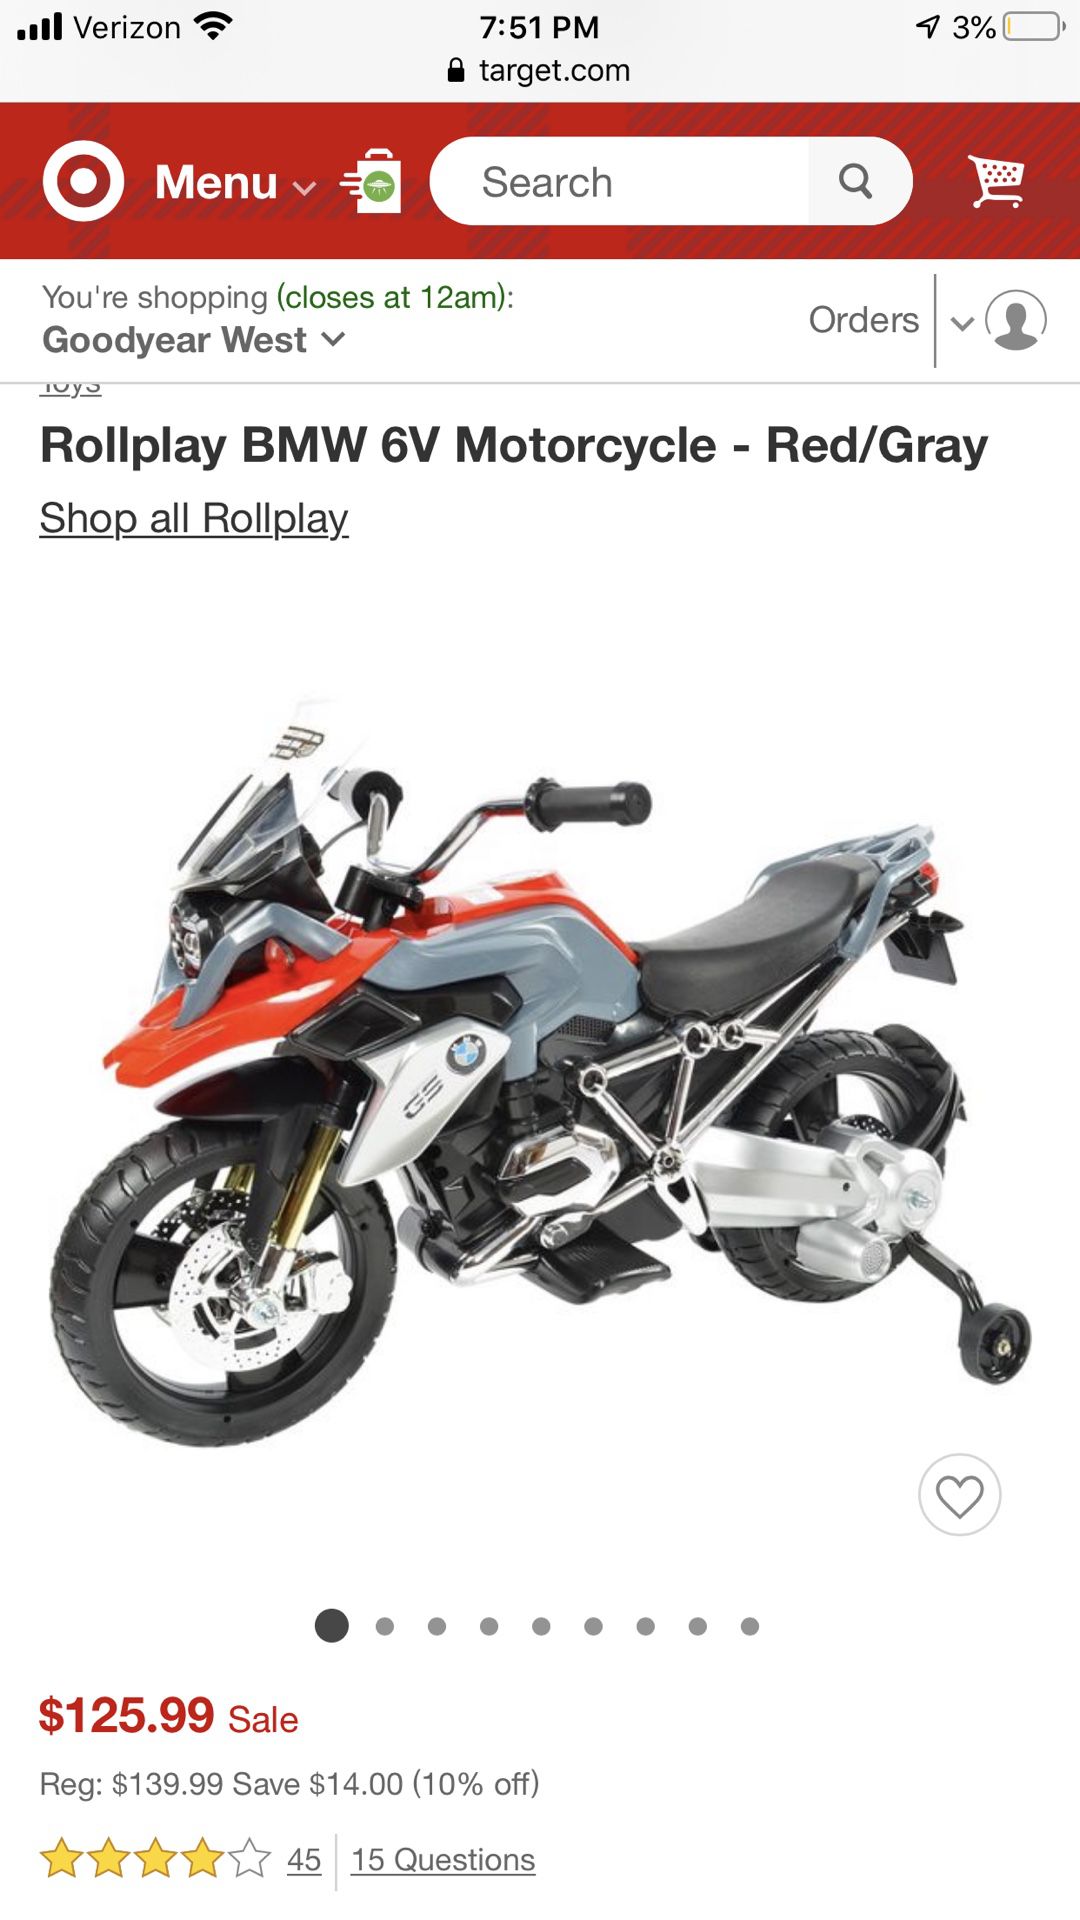 BMW 6V Motorcycle - Red/Gray